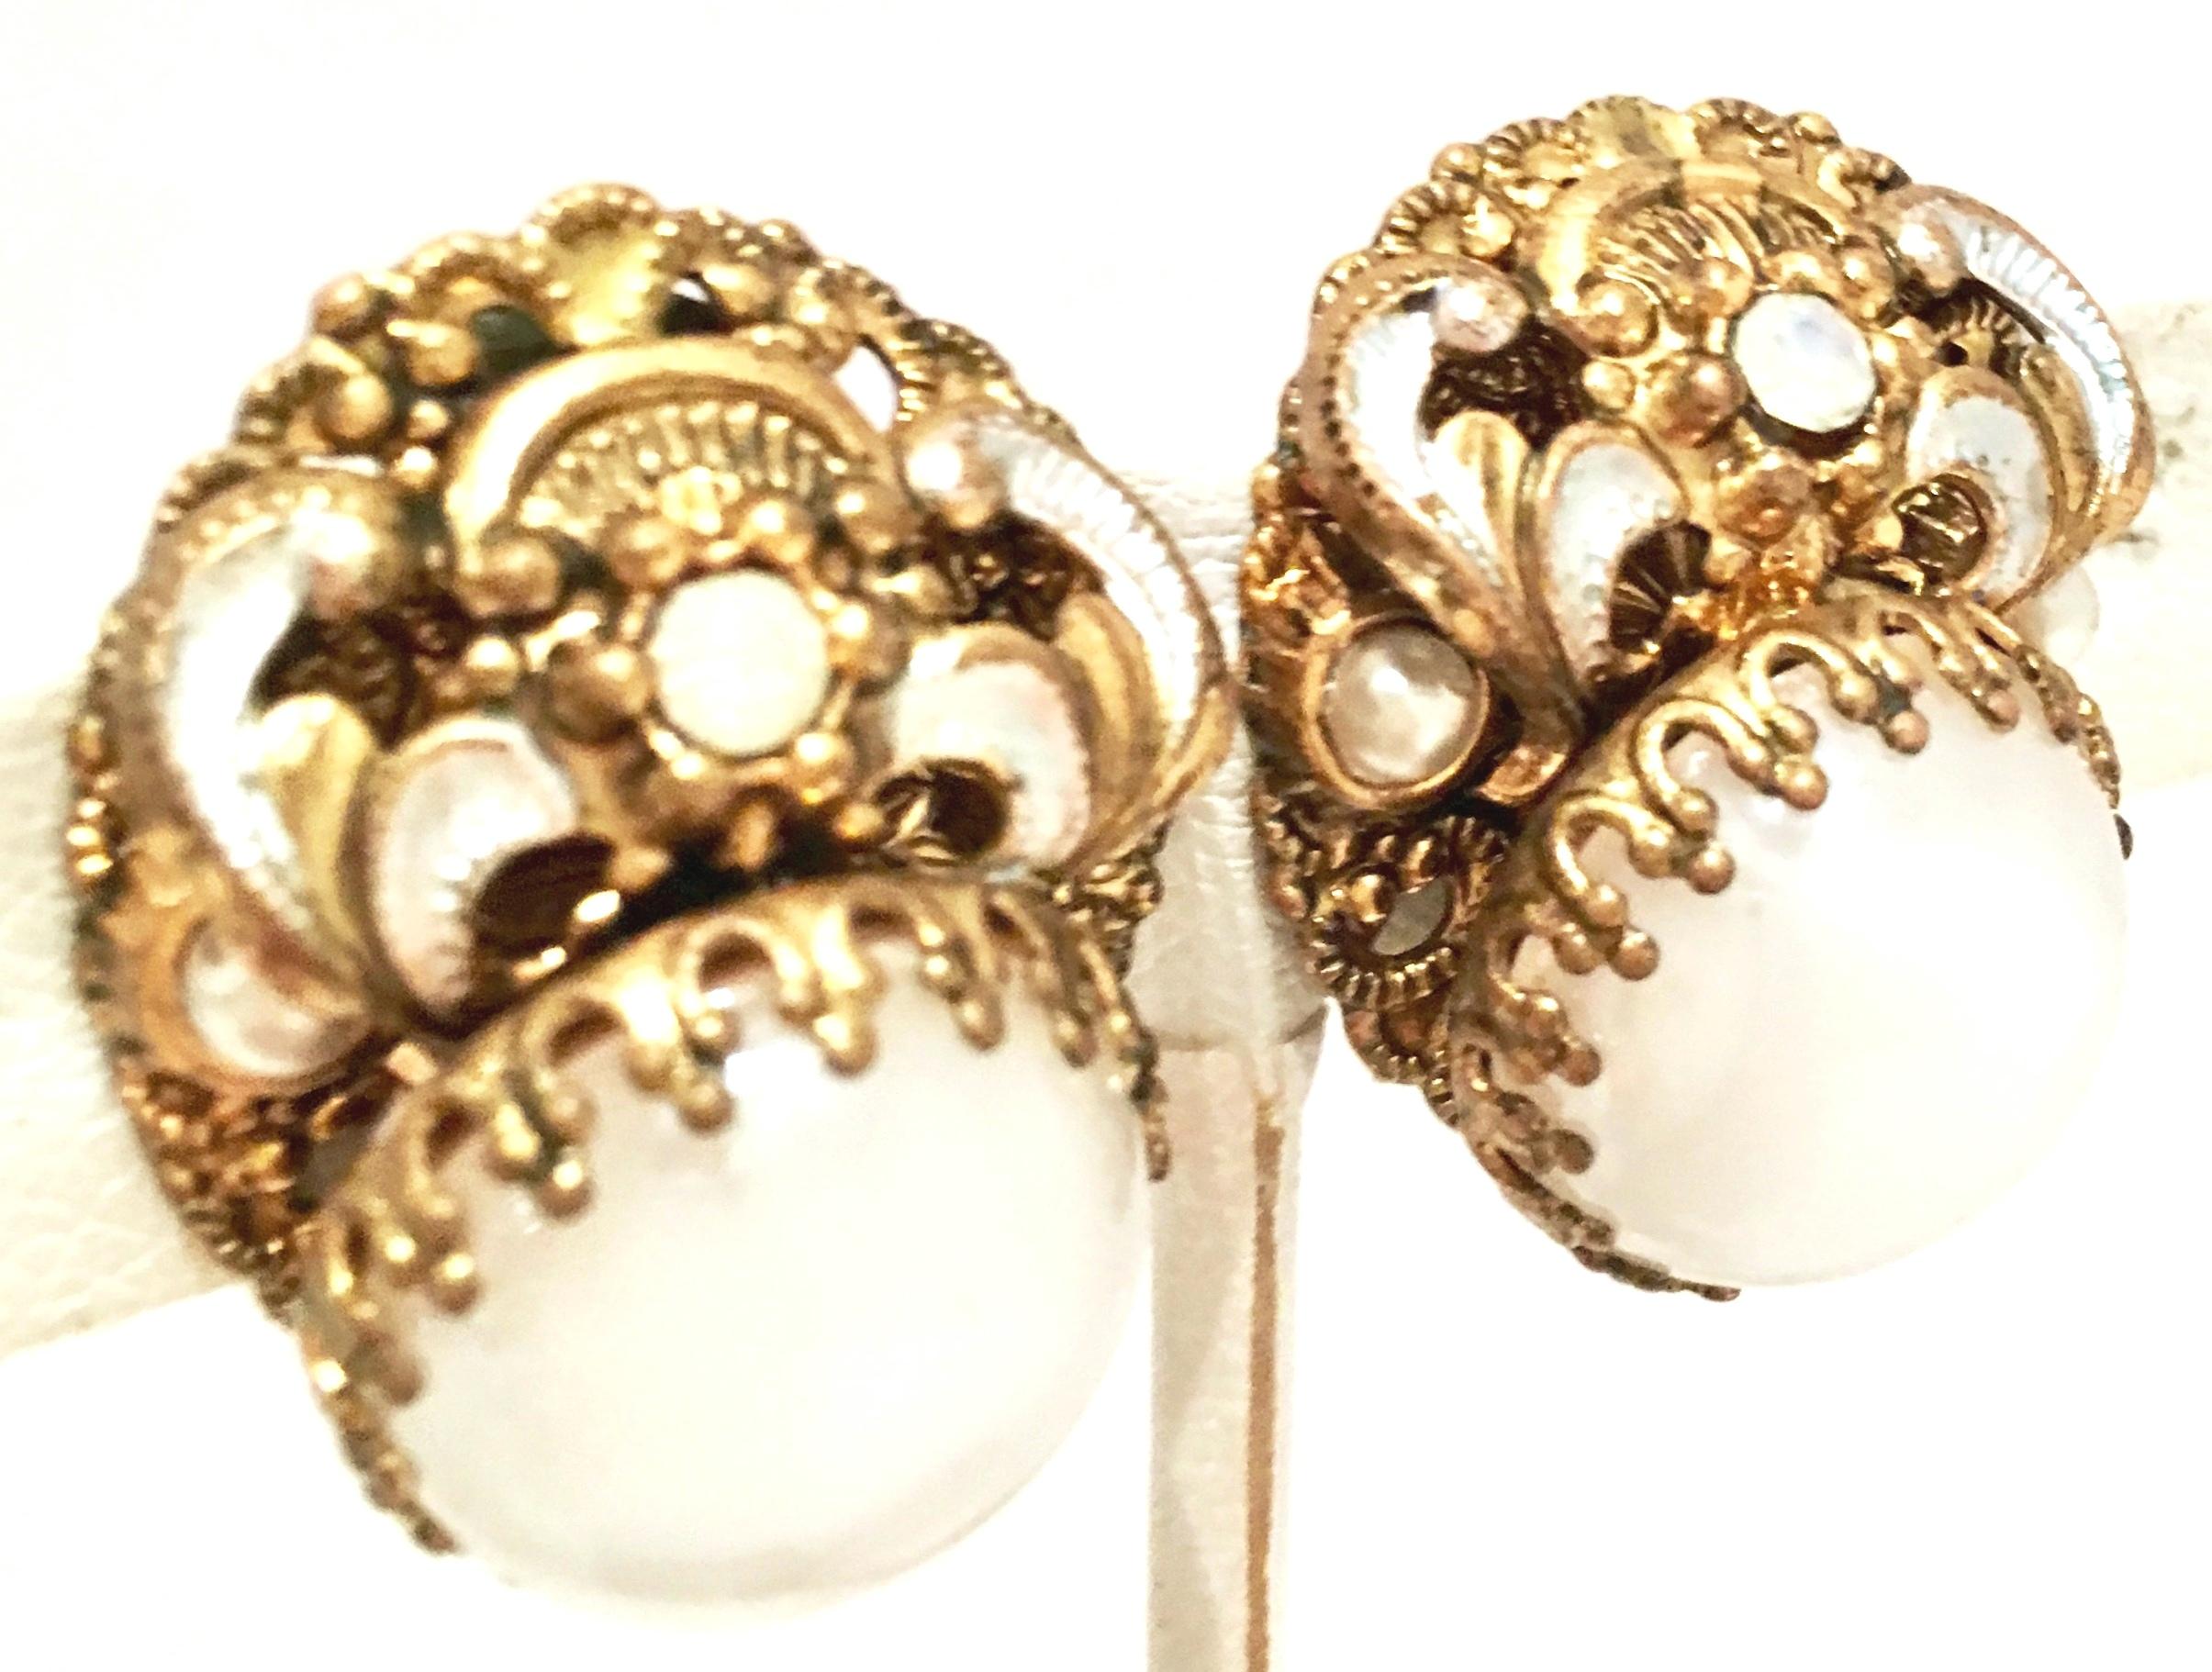 Mid-20th Century Miriam Haskell Style Vermeil Gold & Silver, Molded Glass, Faux Pearl Earrings.
These Art Nouveau style earrings feature a central white opaque polished molded glass central stone with dog tooth prong set detail. Finely crafted and